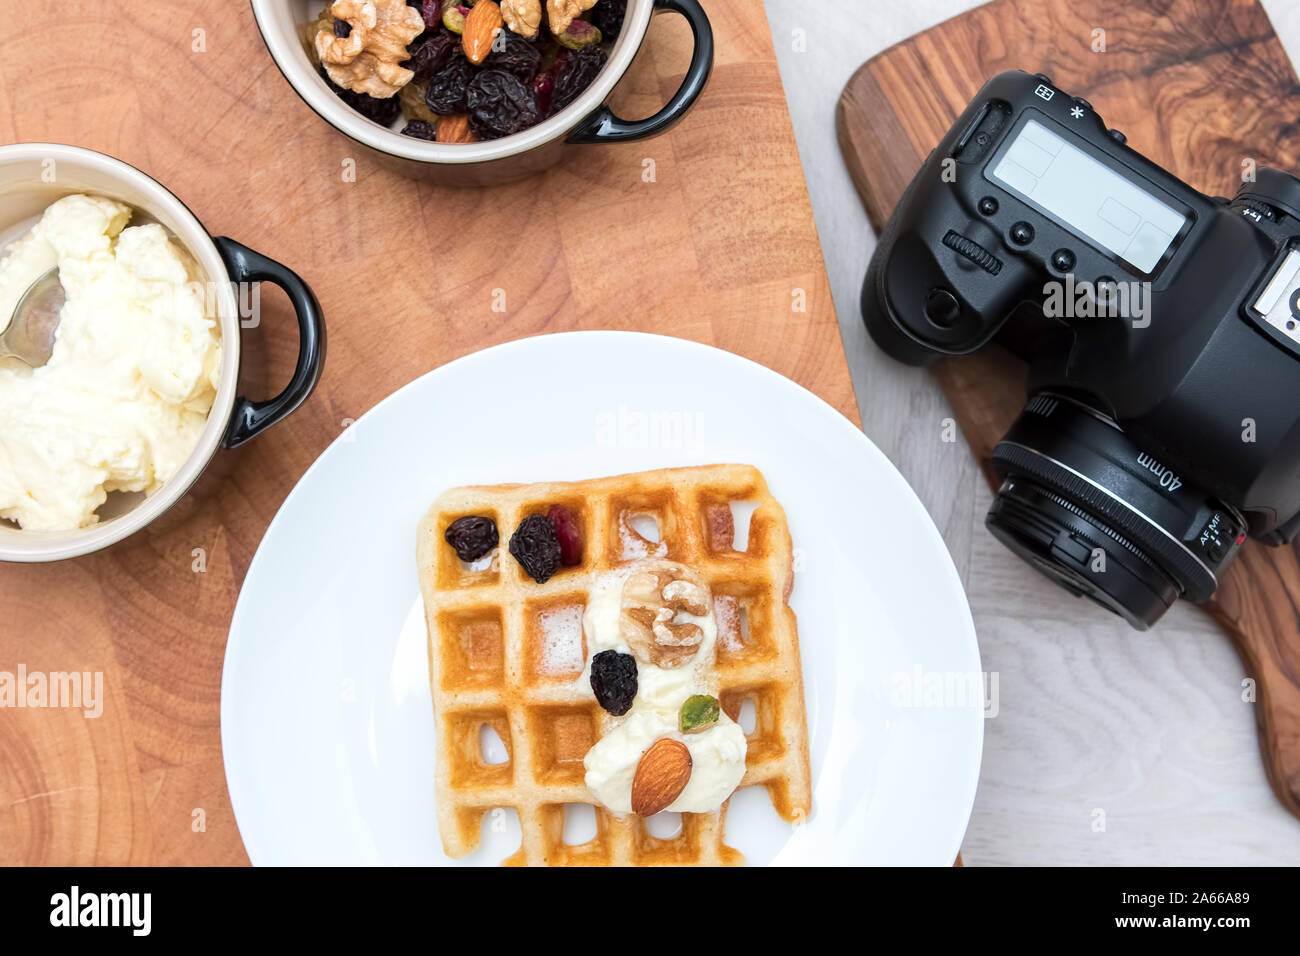 Food photography. Flat lay image of dessert meal with camera. Sweet fruit and nut waffles with fresh cream with waiting studio camera. Stock Photo